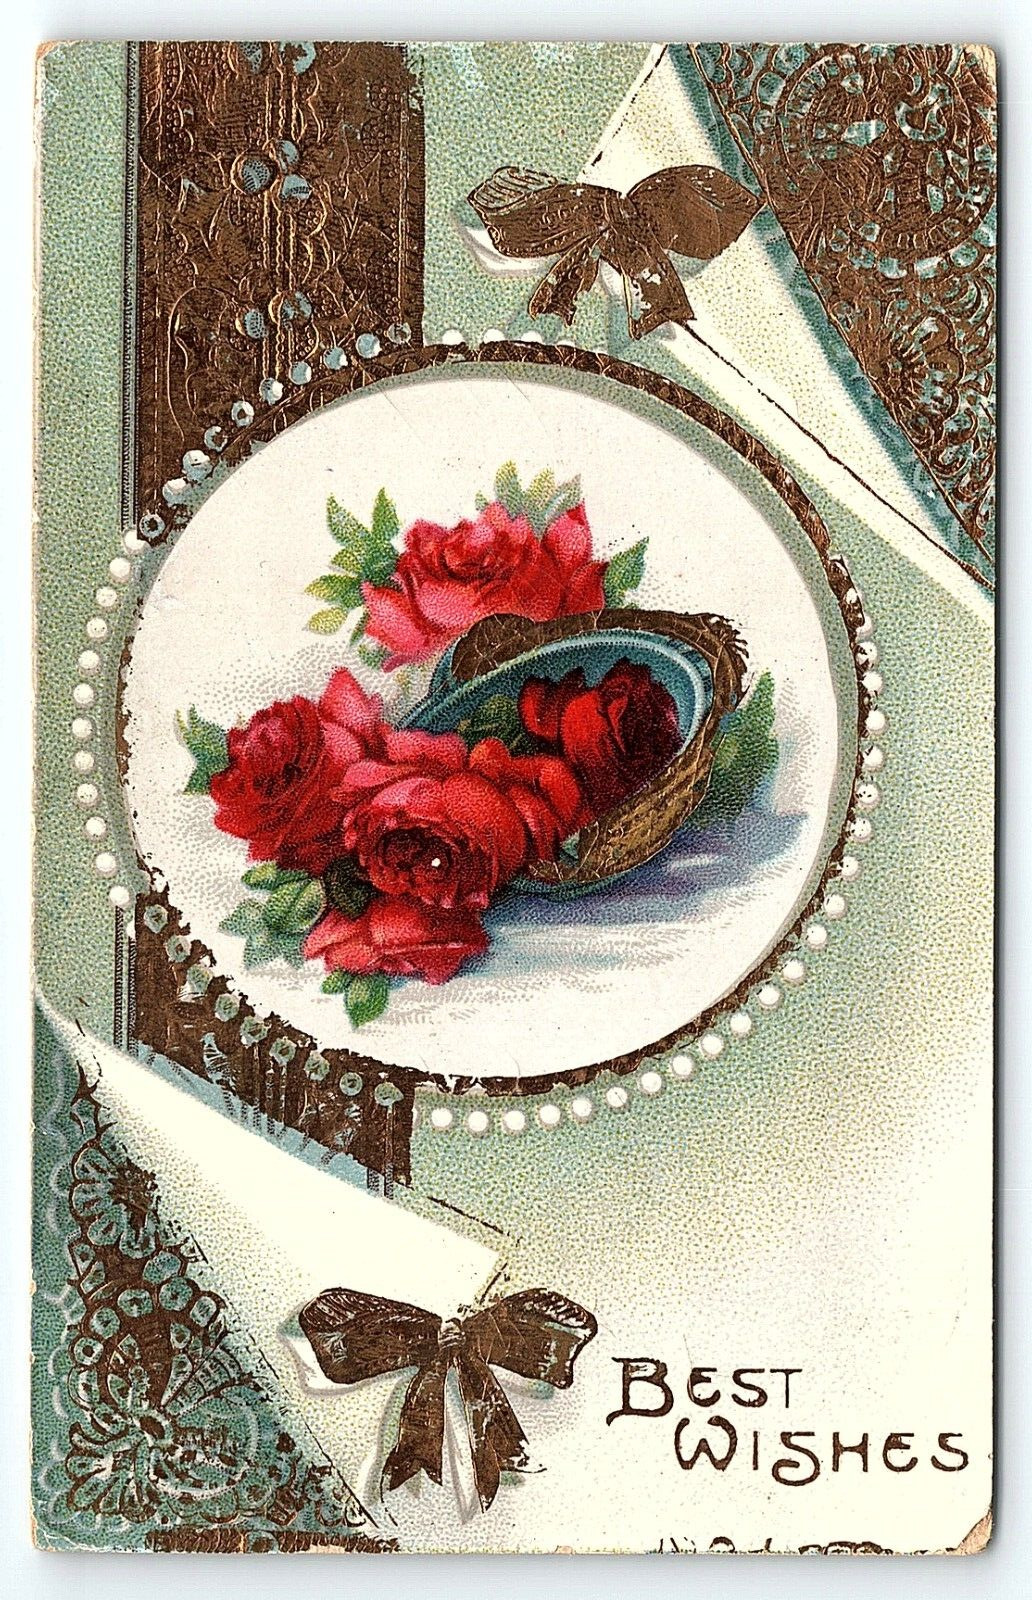 c1910 CROOKSTON MINNESOTA BEST WISHES ROSES GUILDED EMBOSSED POSTCARD P3642